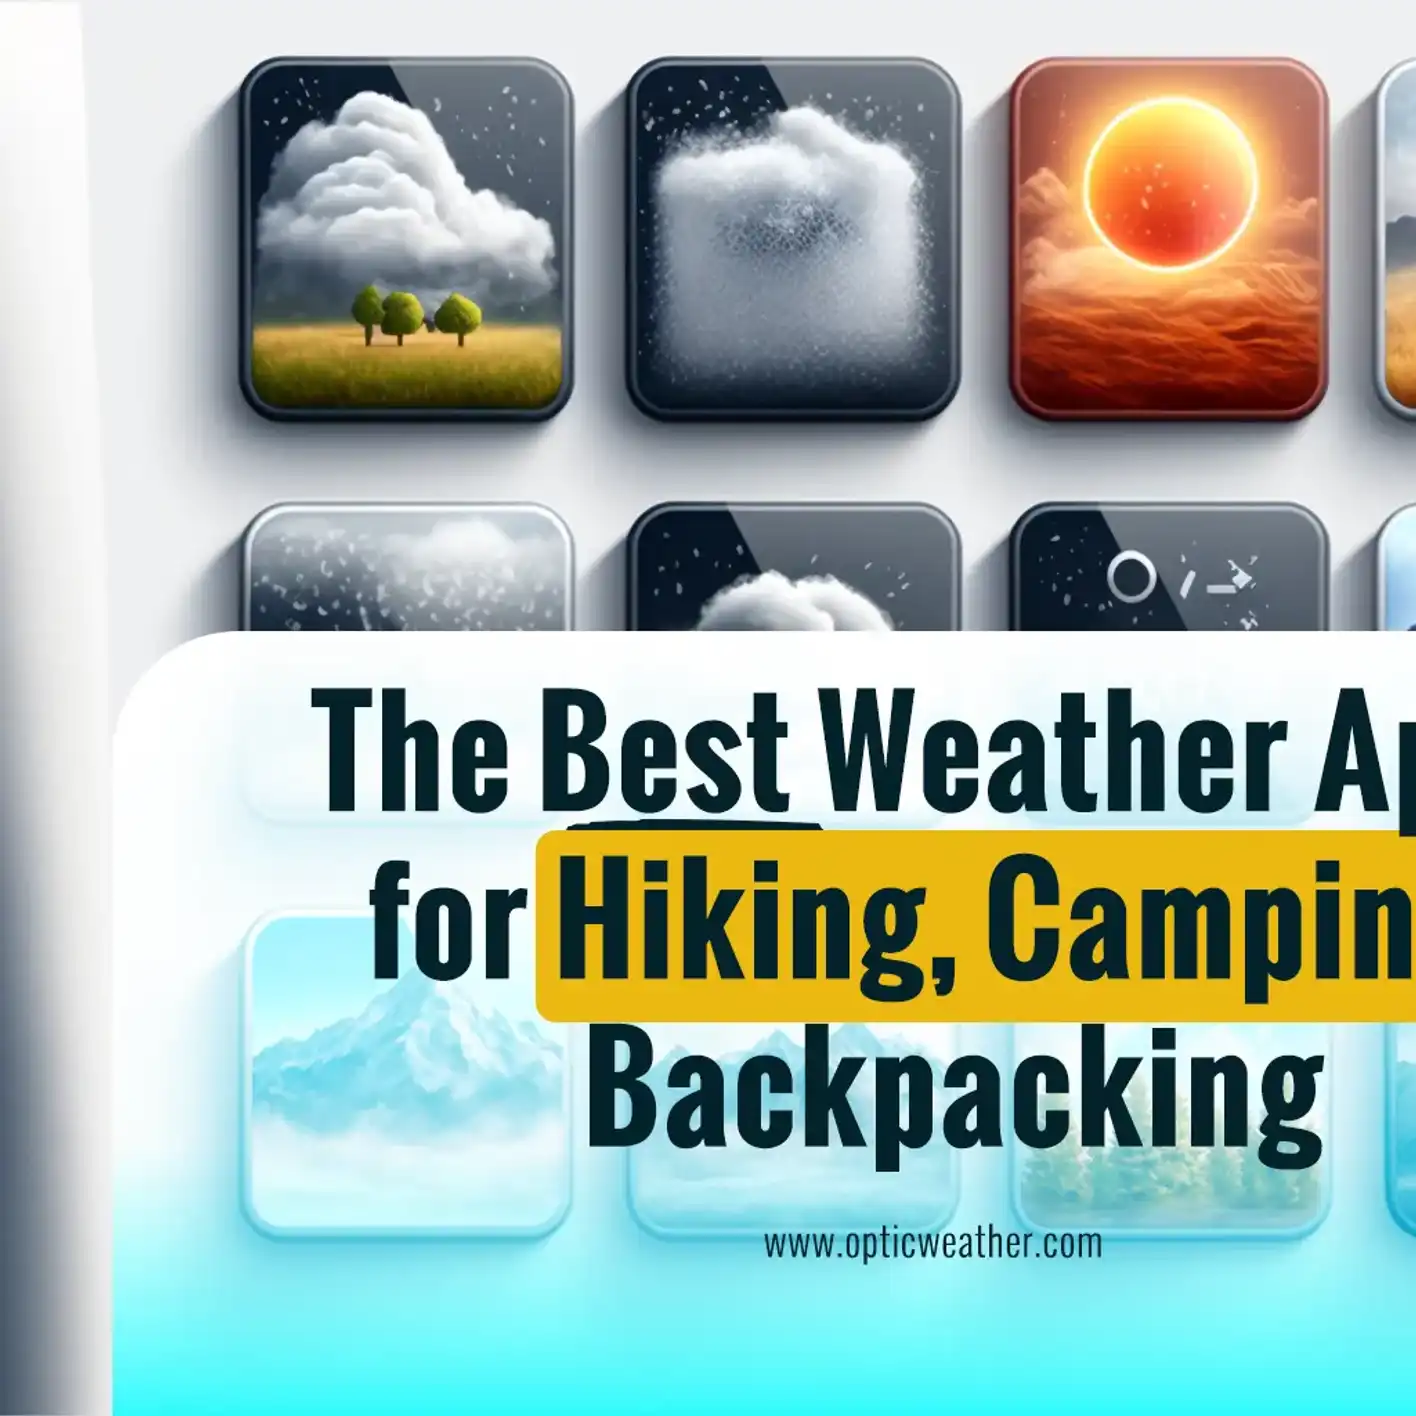 The Best Weather Apps for Hiking, Camping, and Backpacking